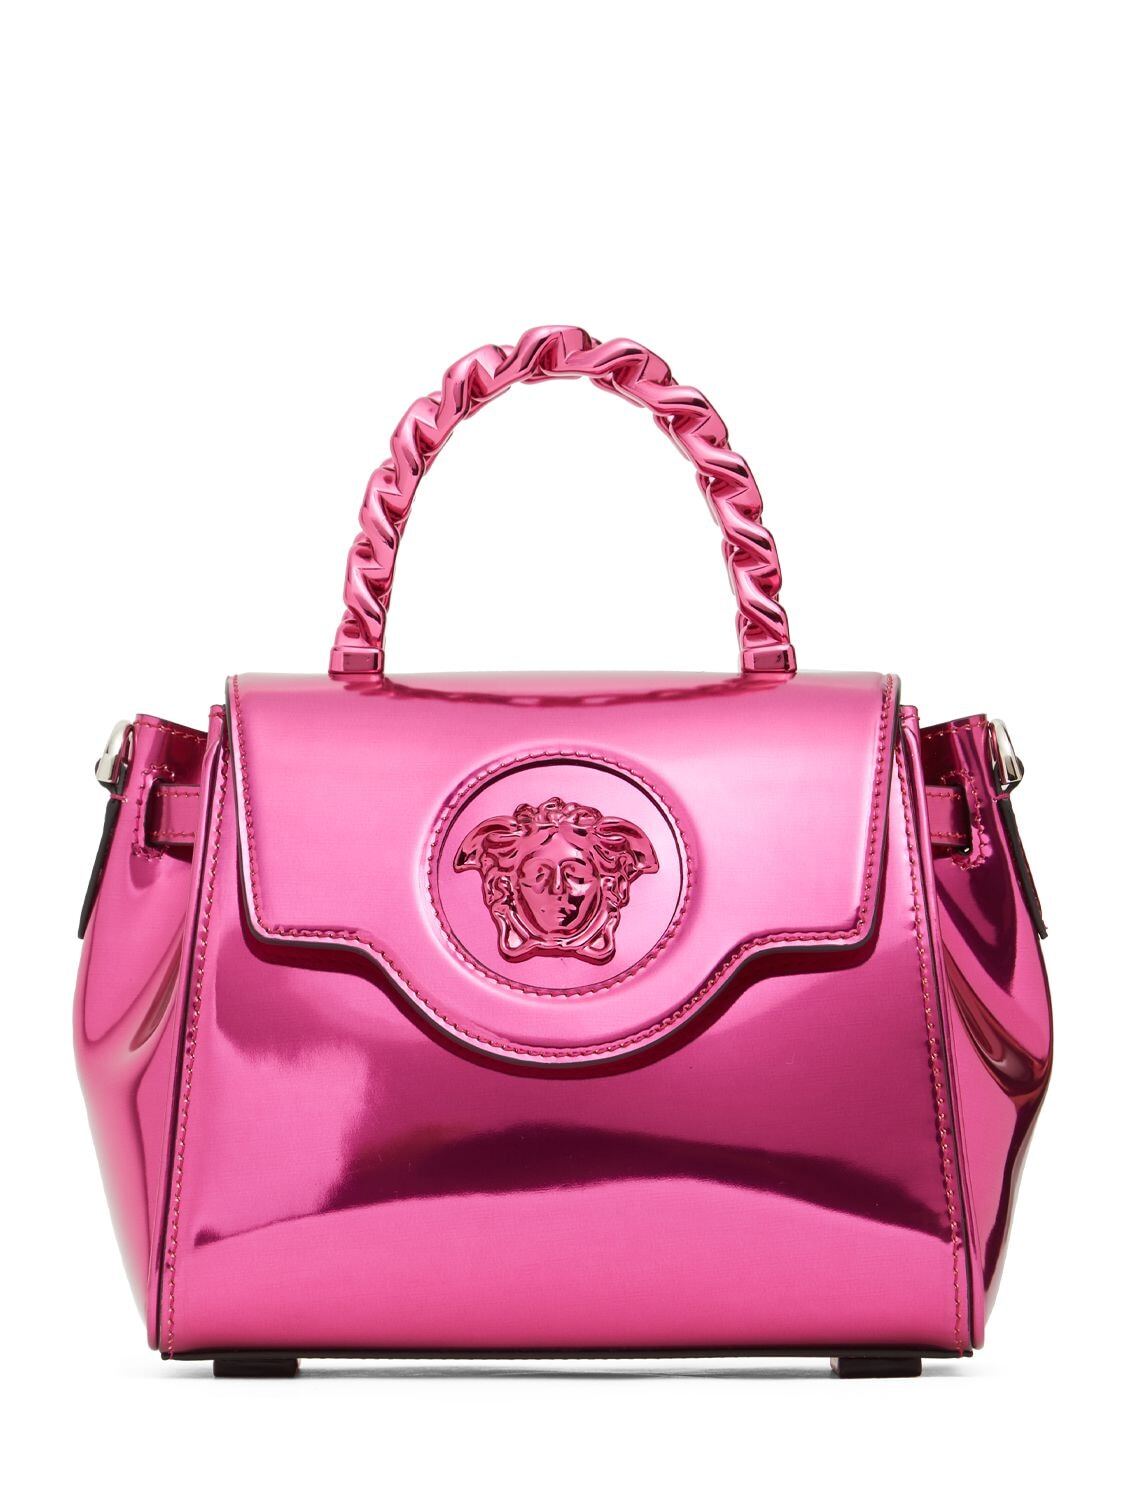 VERSACE Small Patent Medusa Top Handle Bag in pink